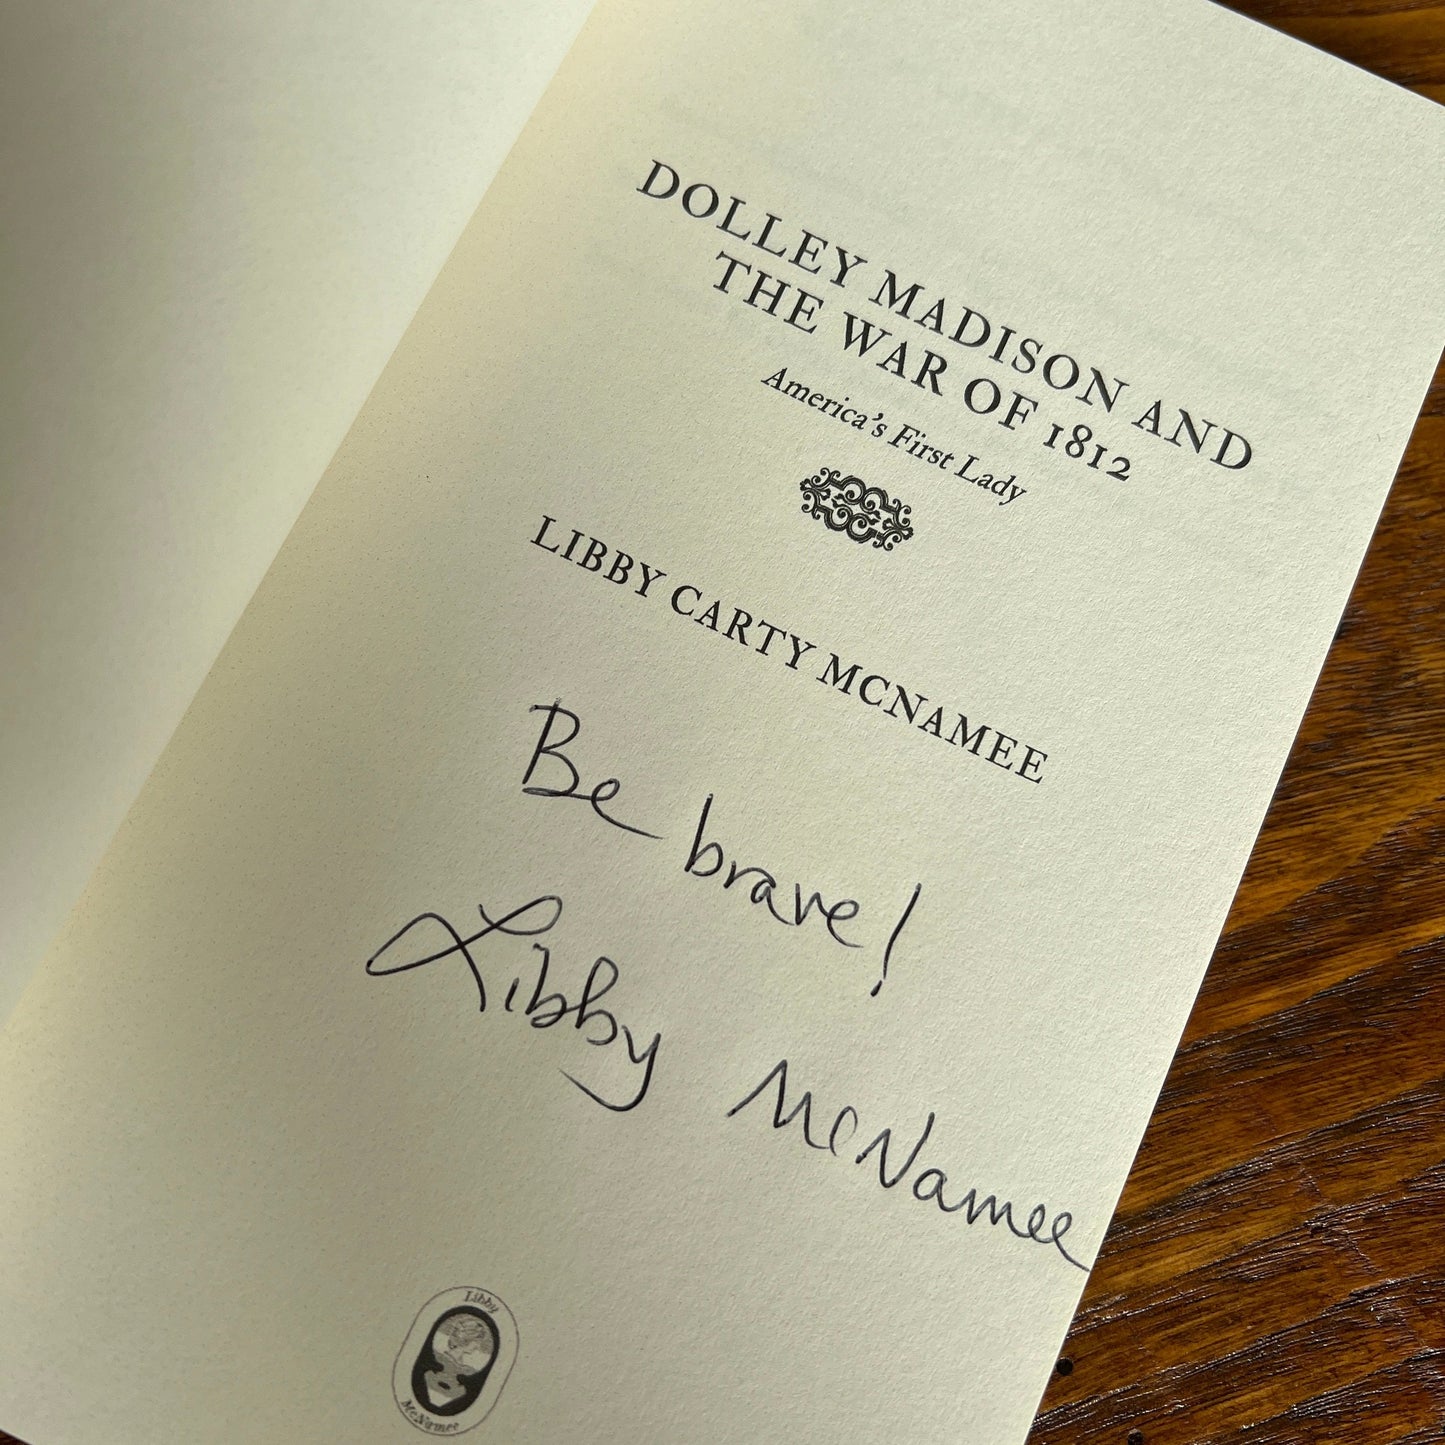 "Dolley Madison and the War of 1812" - Signed by the author, Libby Carty McNamee